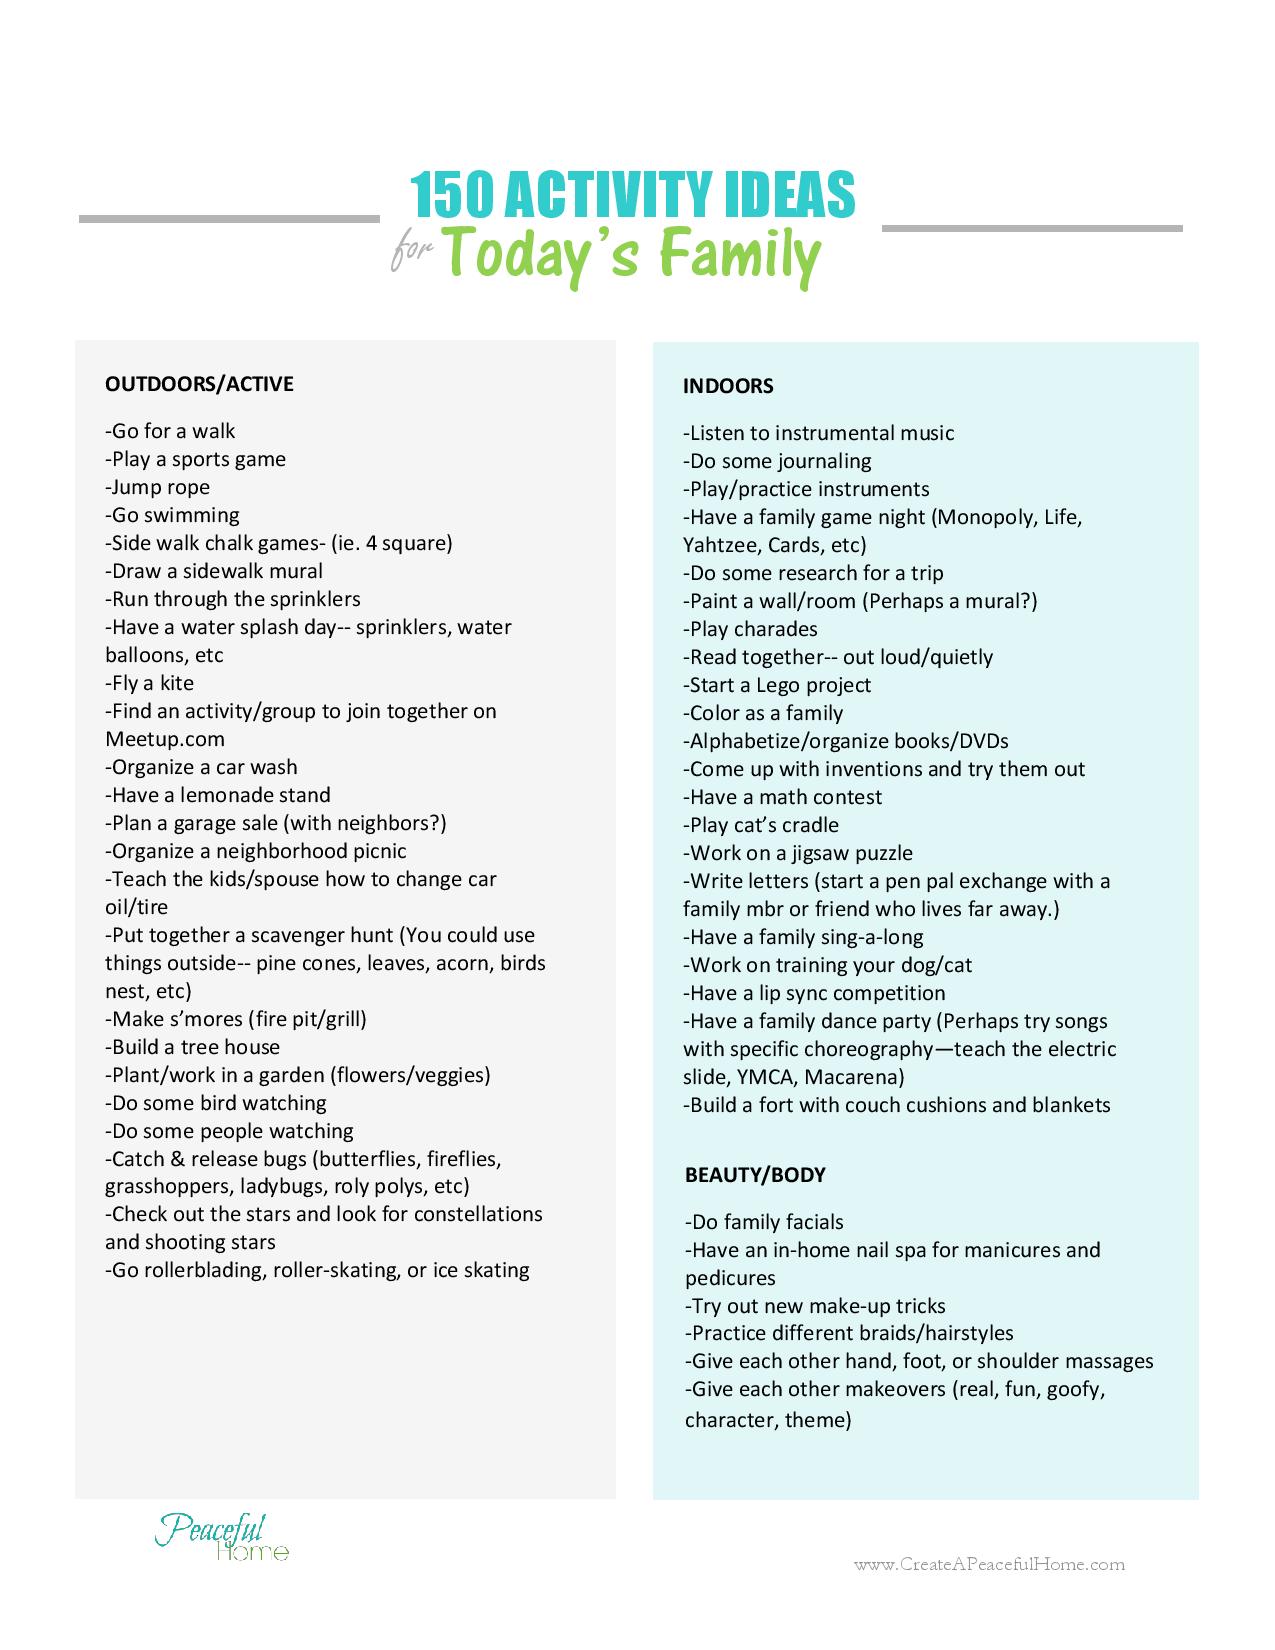 150 Activity Ideas for Today's Family | CreateAPeacefulHome.com